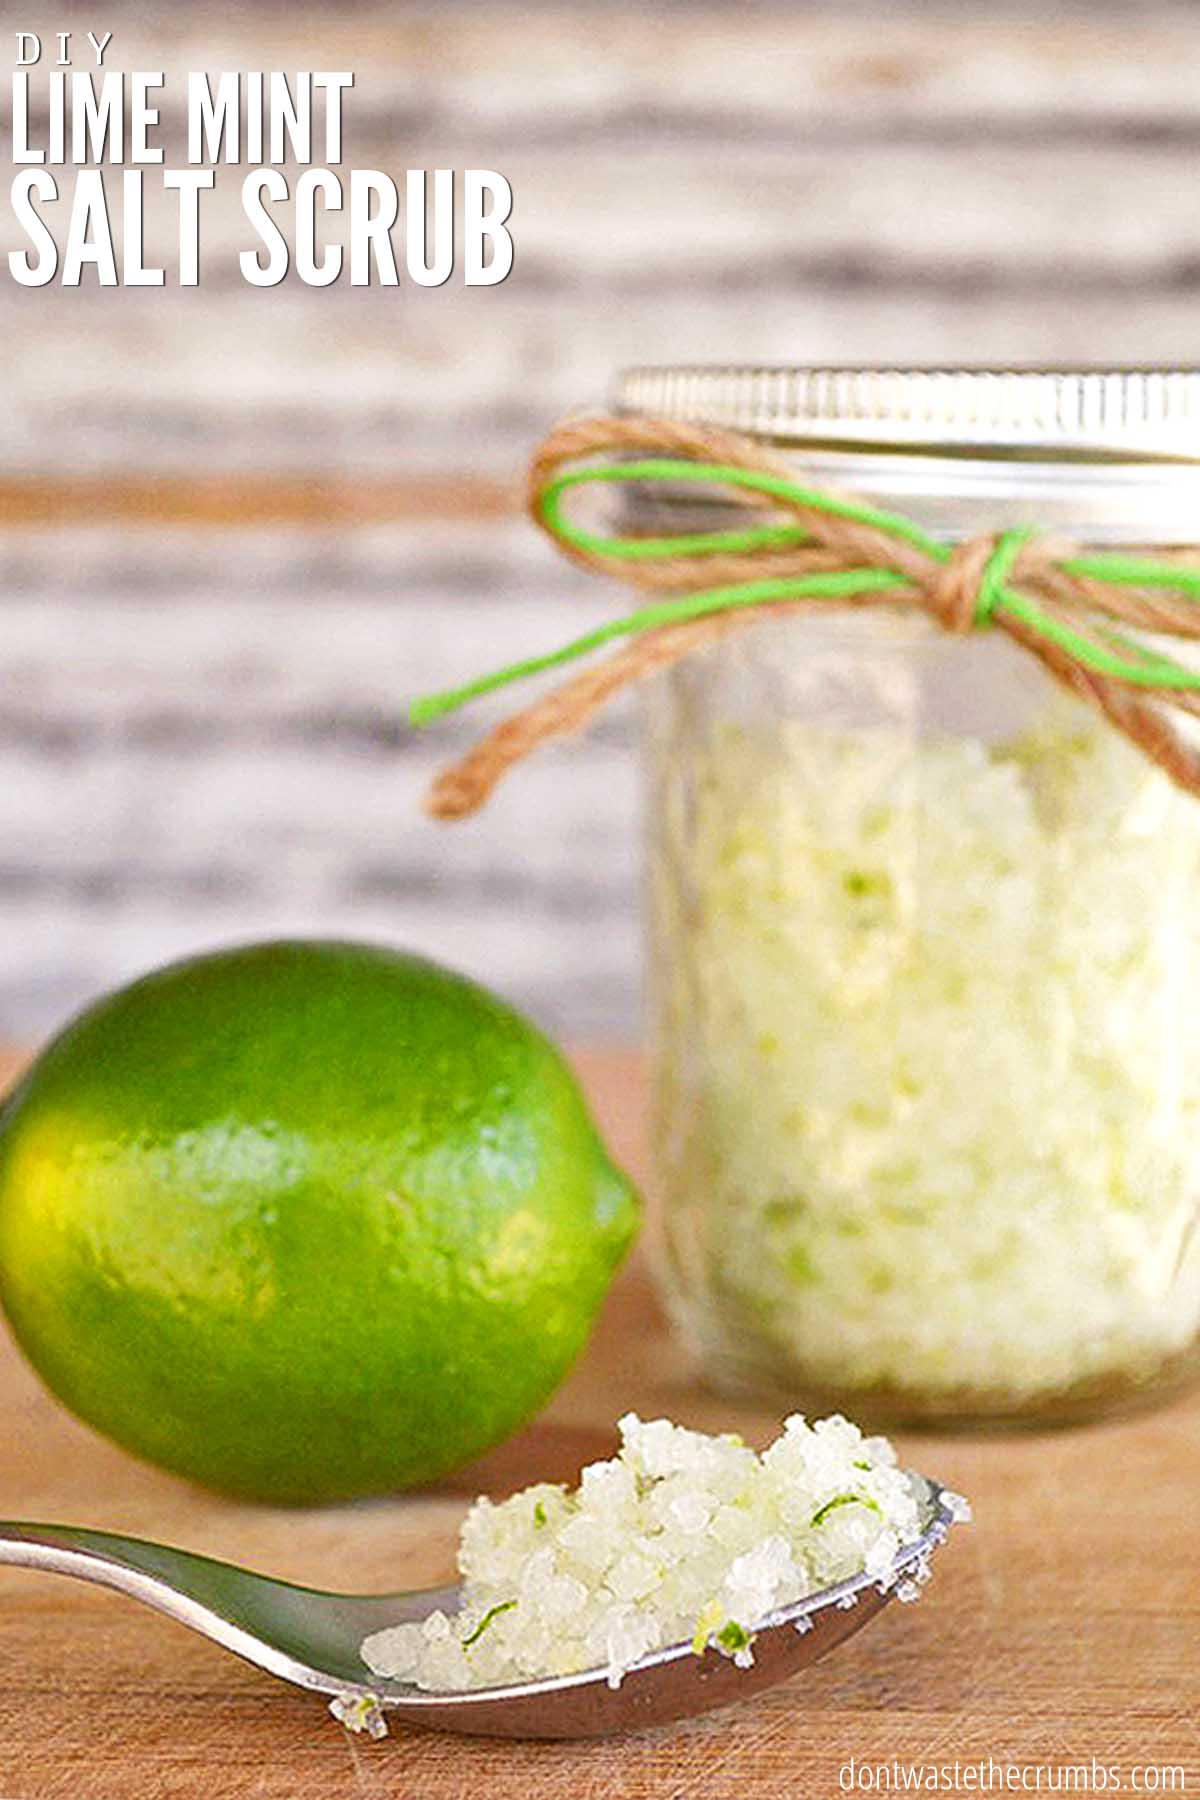 Spoonful of homemade body scrub and a lime nearby. There is a mason jar with lime mint salt scrub behind the spoon. Text overlay reads, "DIY Lime Mint Salt Scrub".